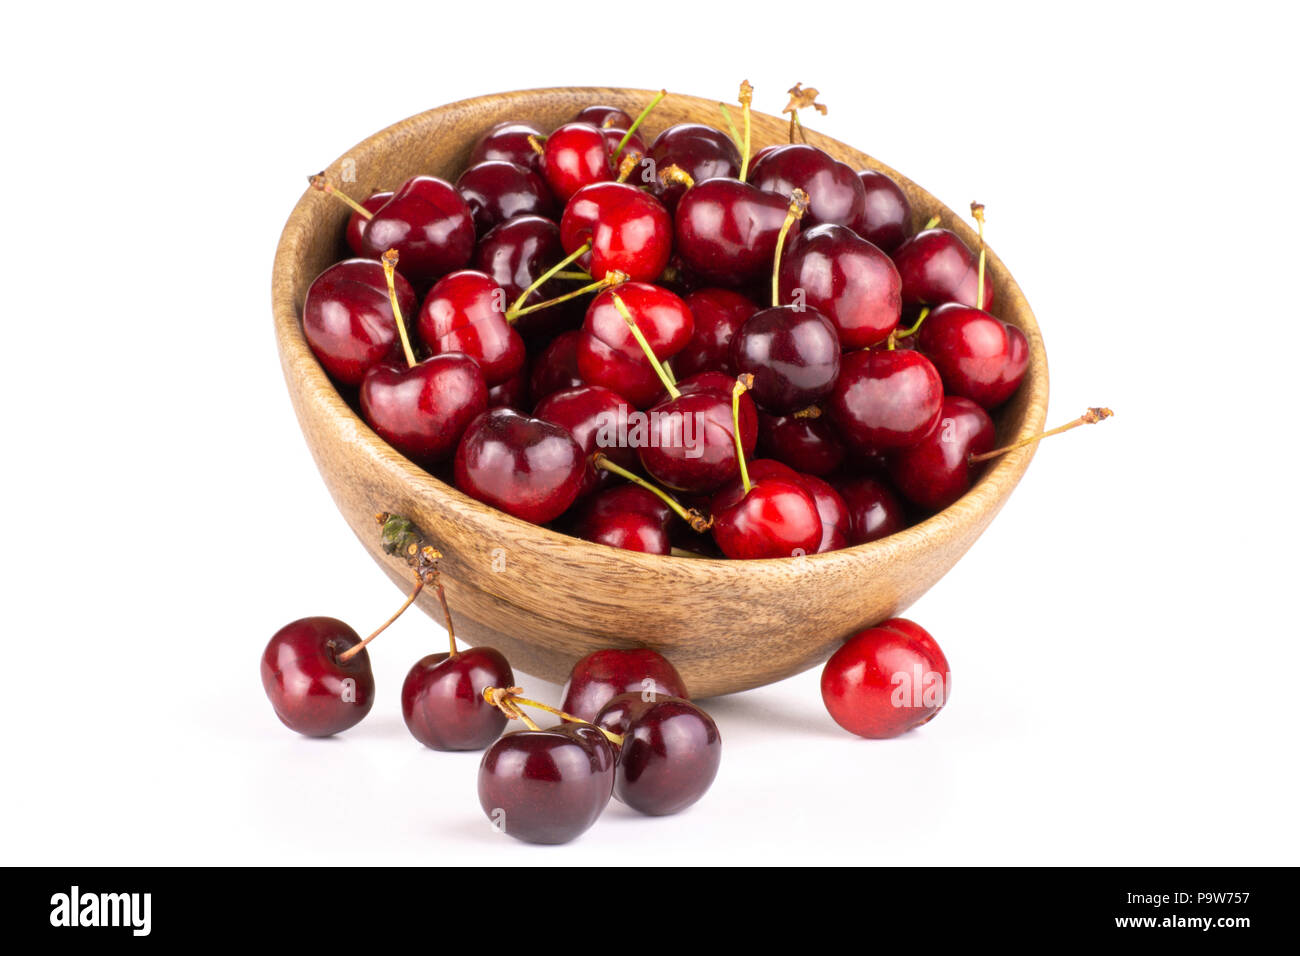 Sweet bright red cherry in a wooden bowl and near it isolated on white Stock Photo